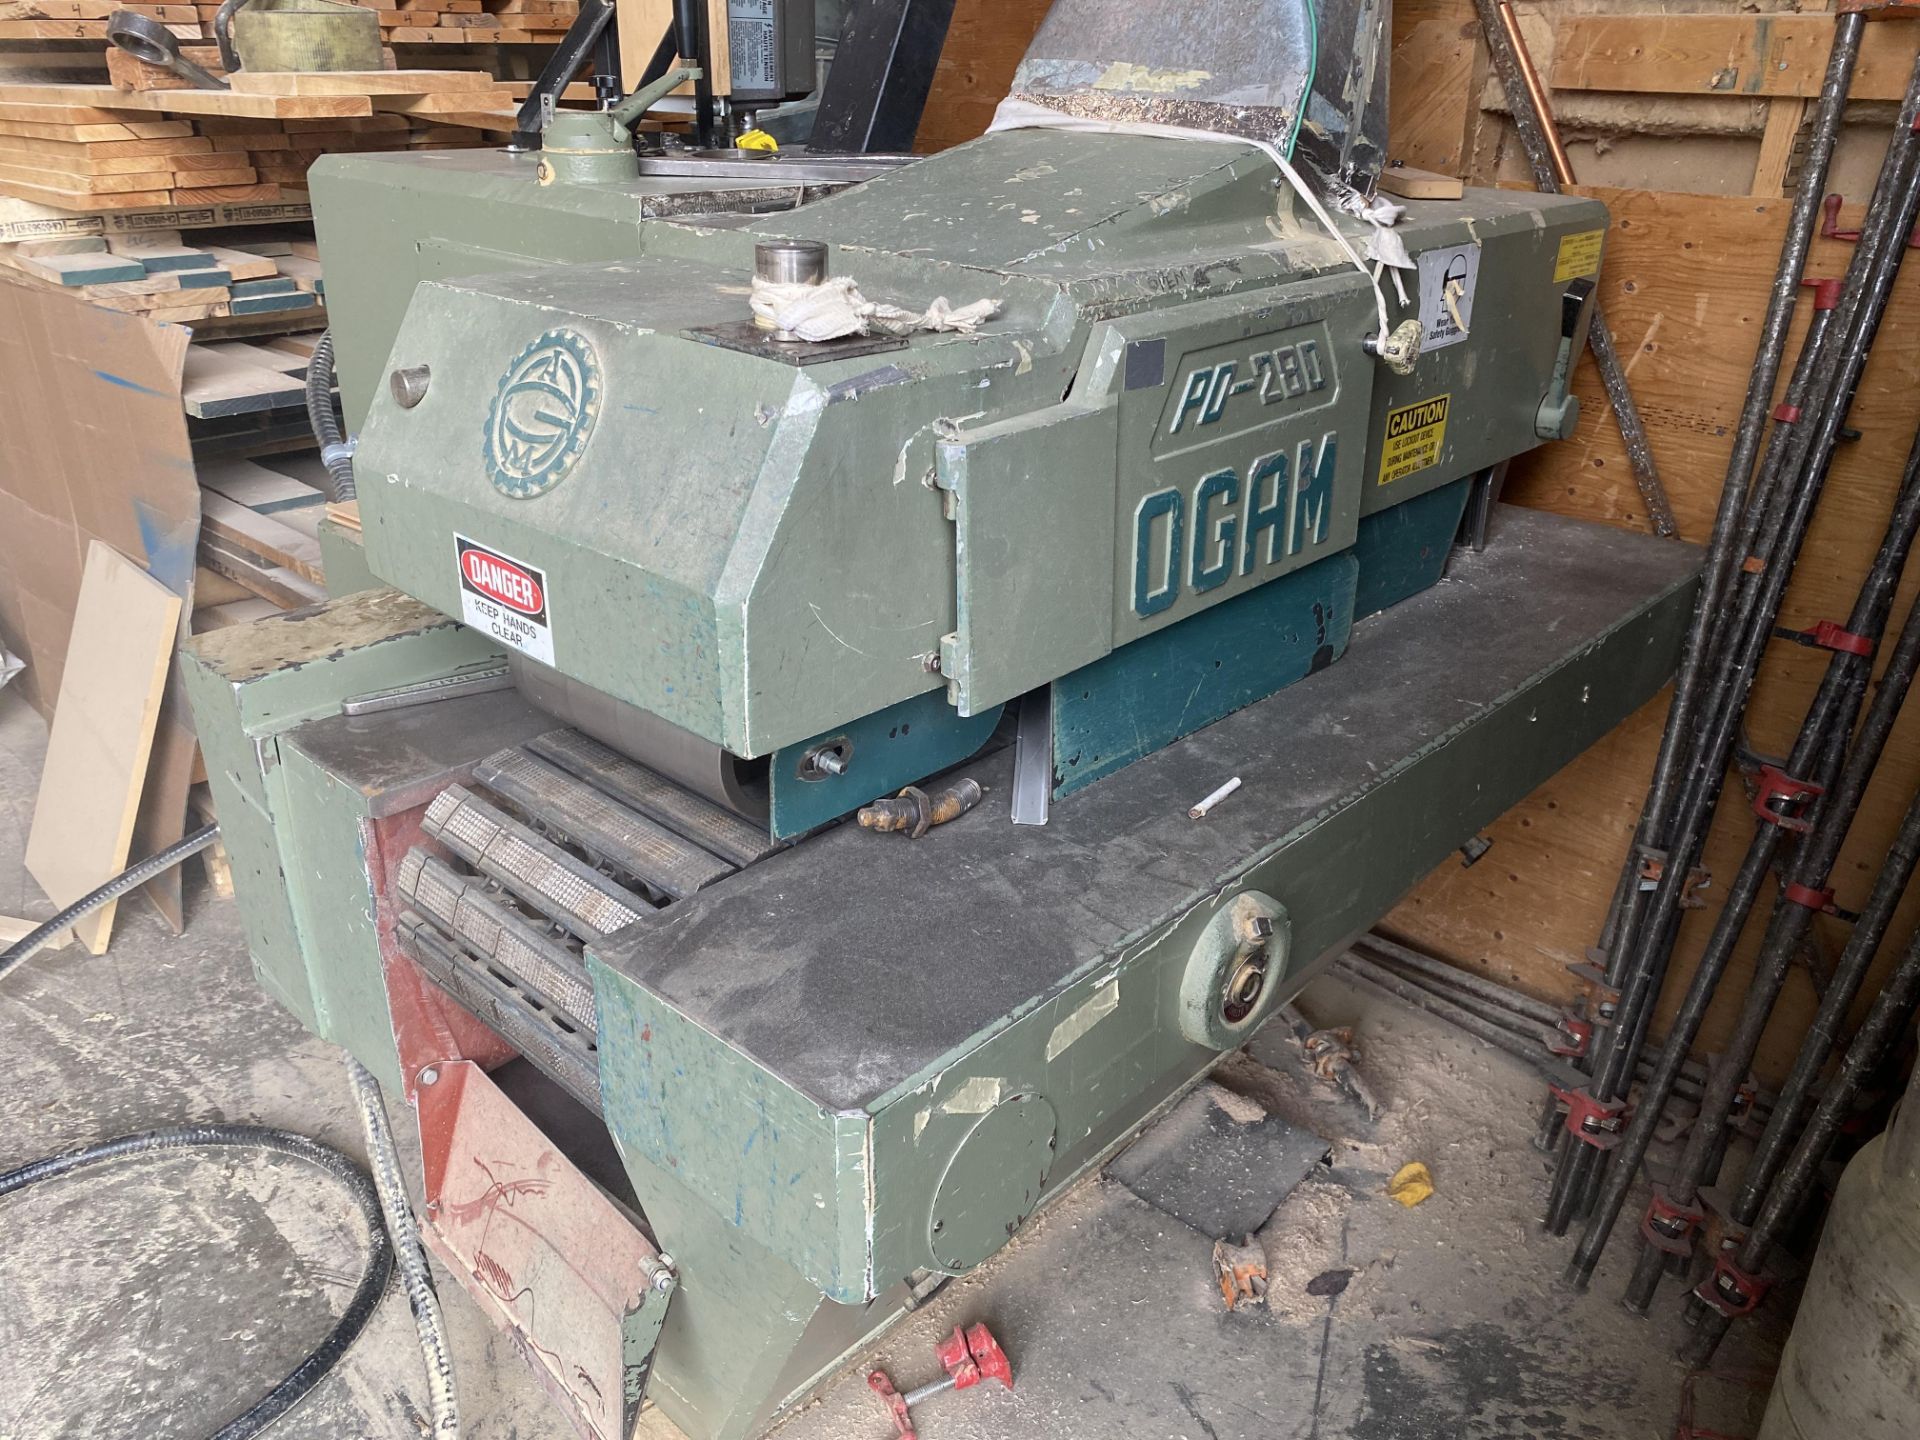 Ogam PO 280 MultiRip Saw, 460v, w/ Laserlight, Baldor Variable Frequency Drive, 12" x 5" Capacity